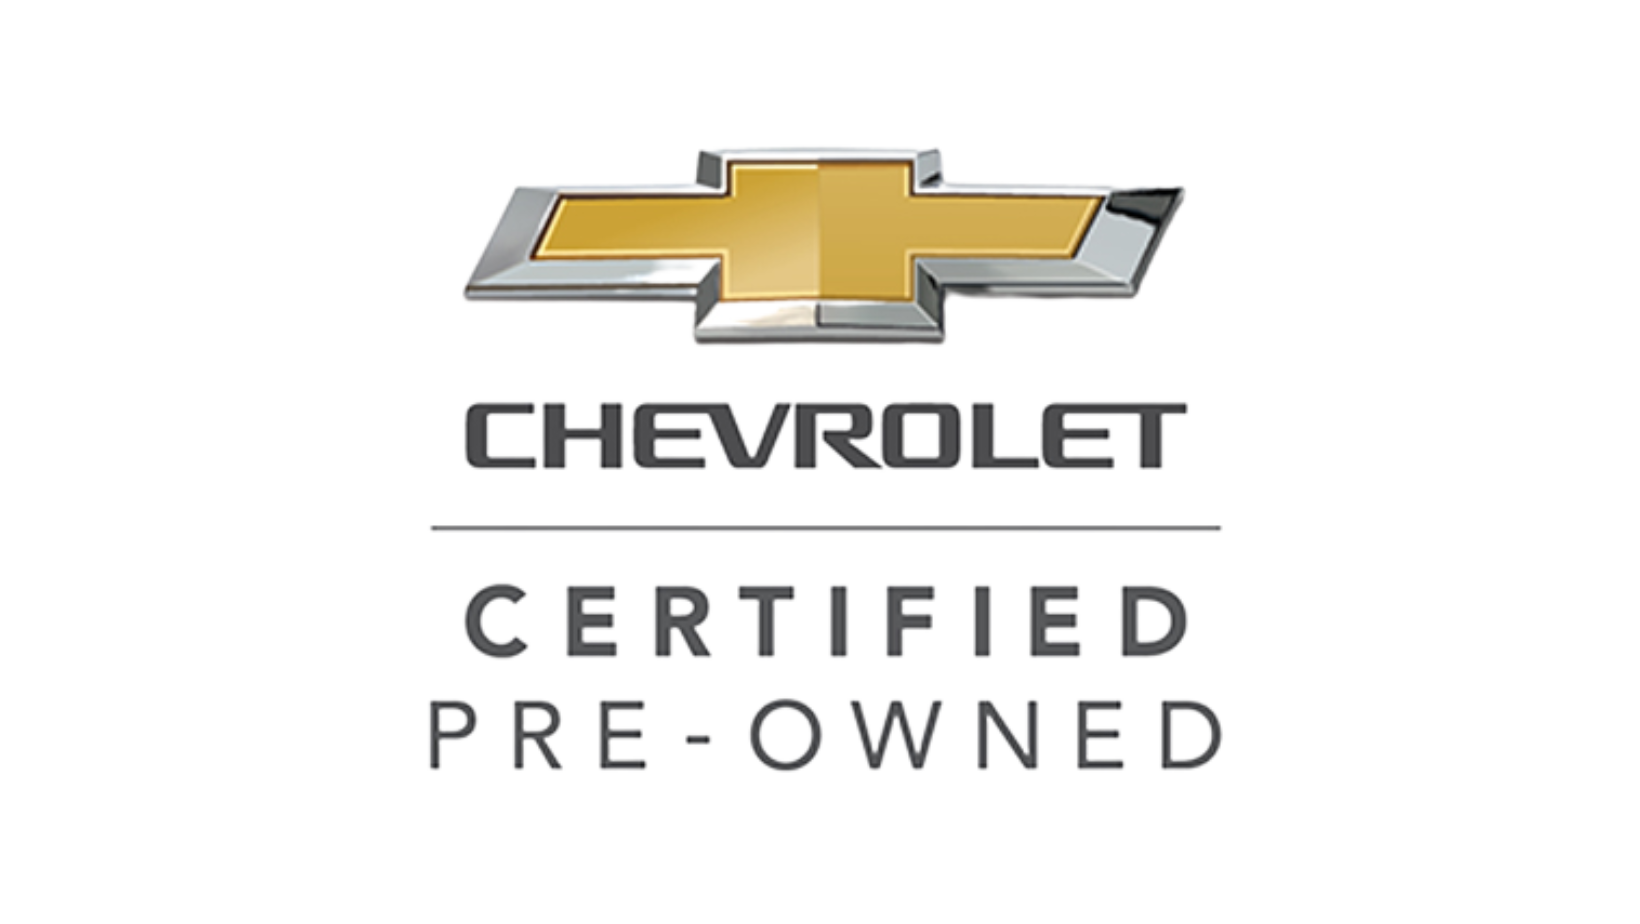 Chevrolet Pre Owned Certifed